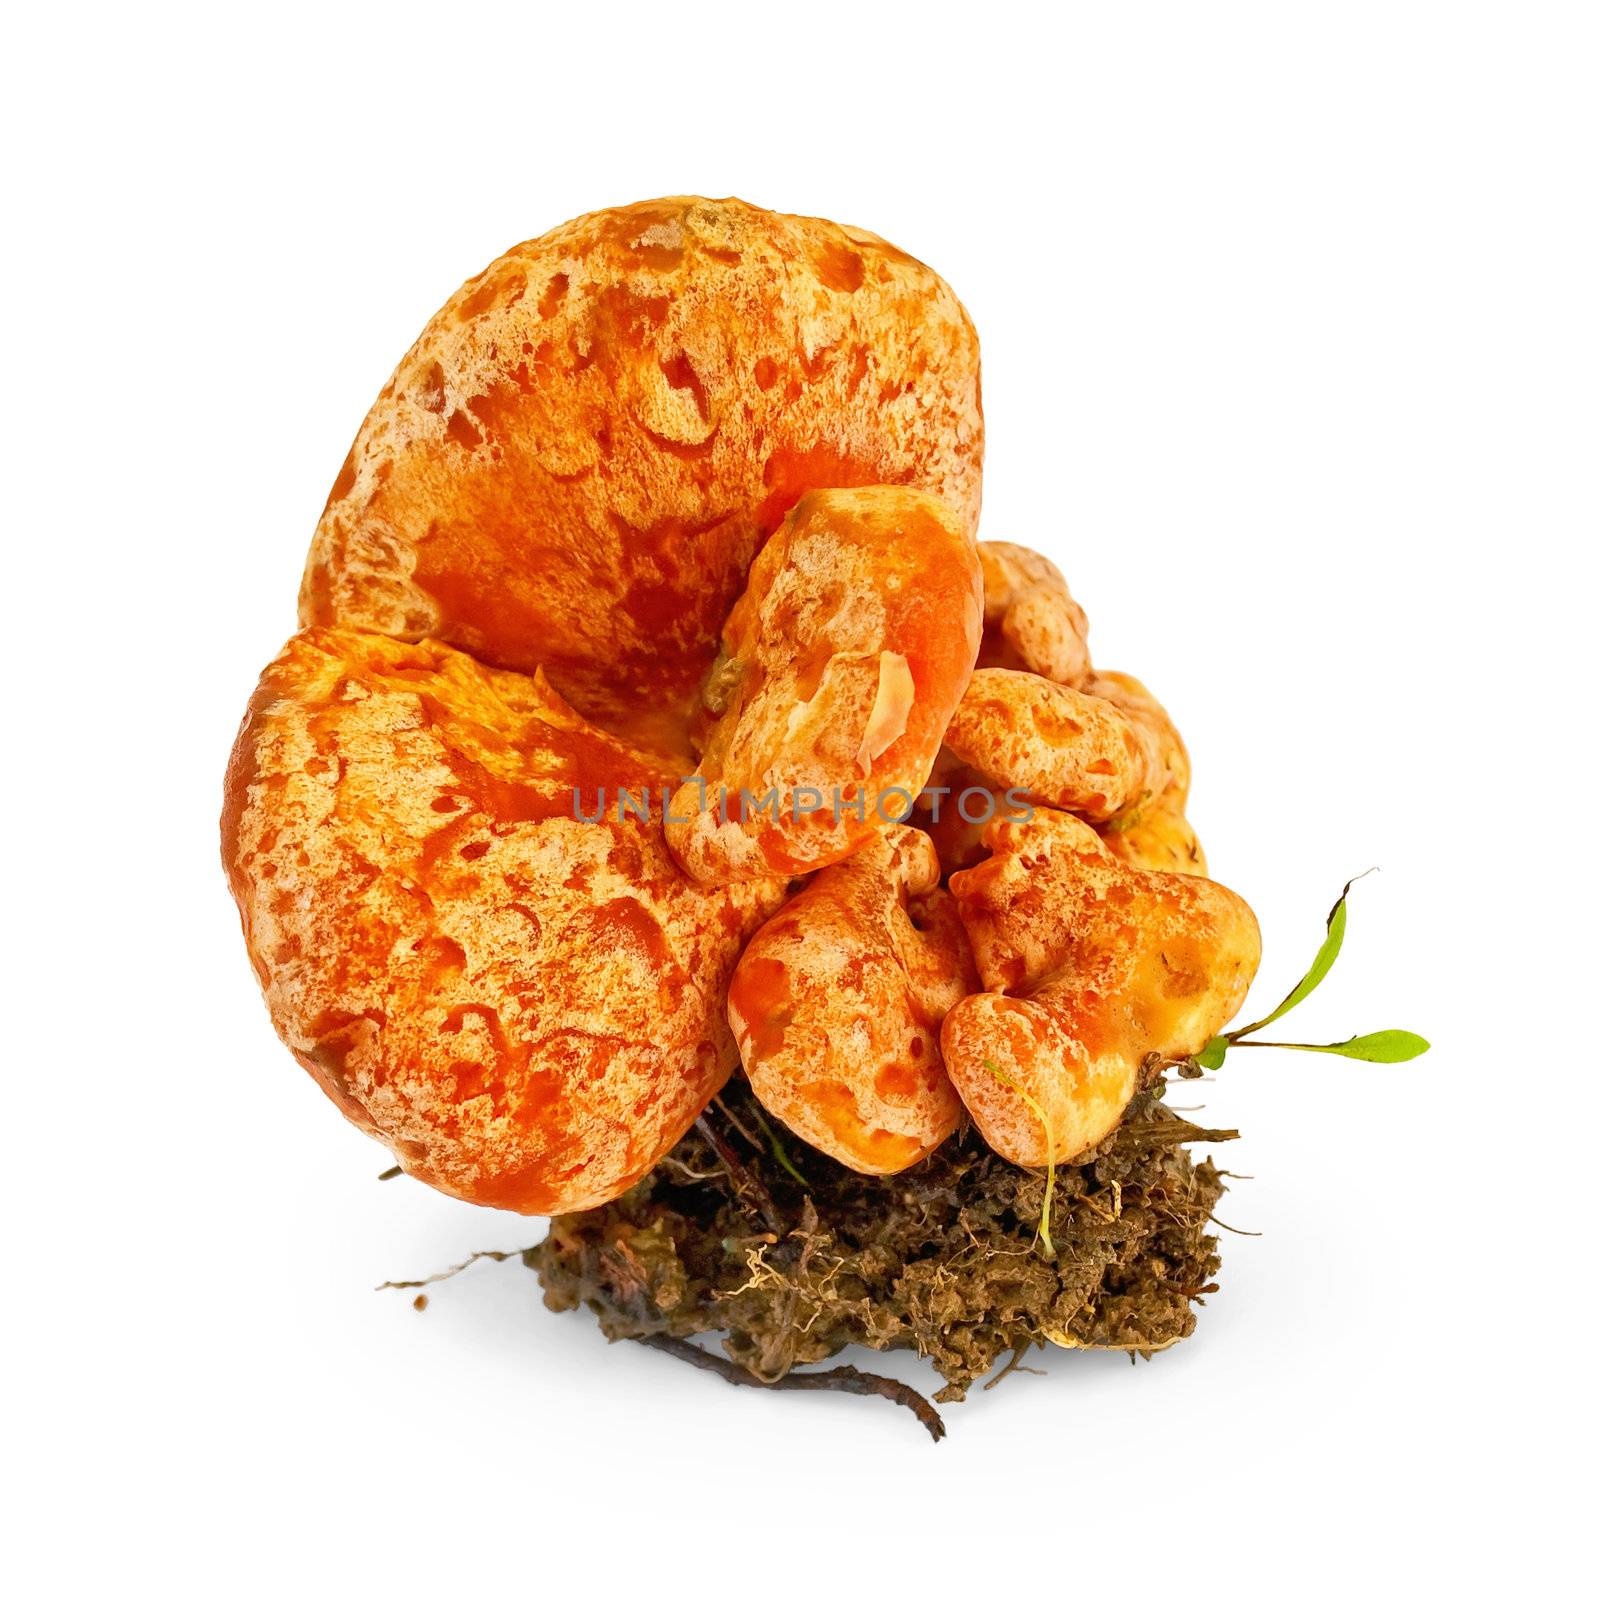 Mushroom saffron to the ground and the green shoots isolated on a white background